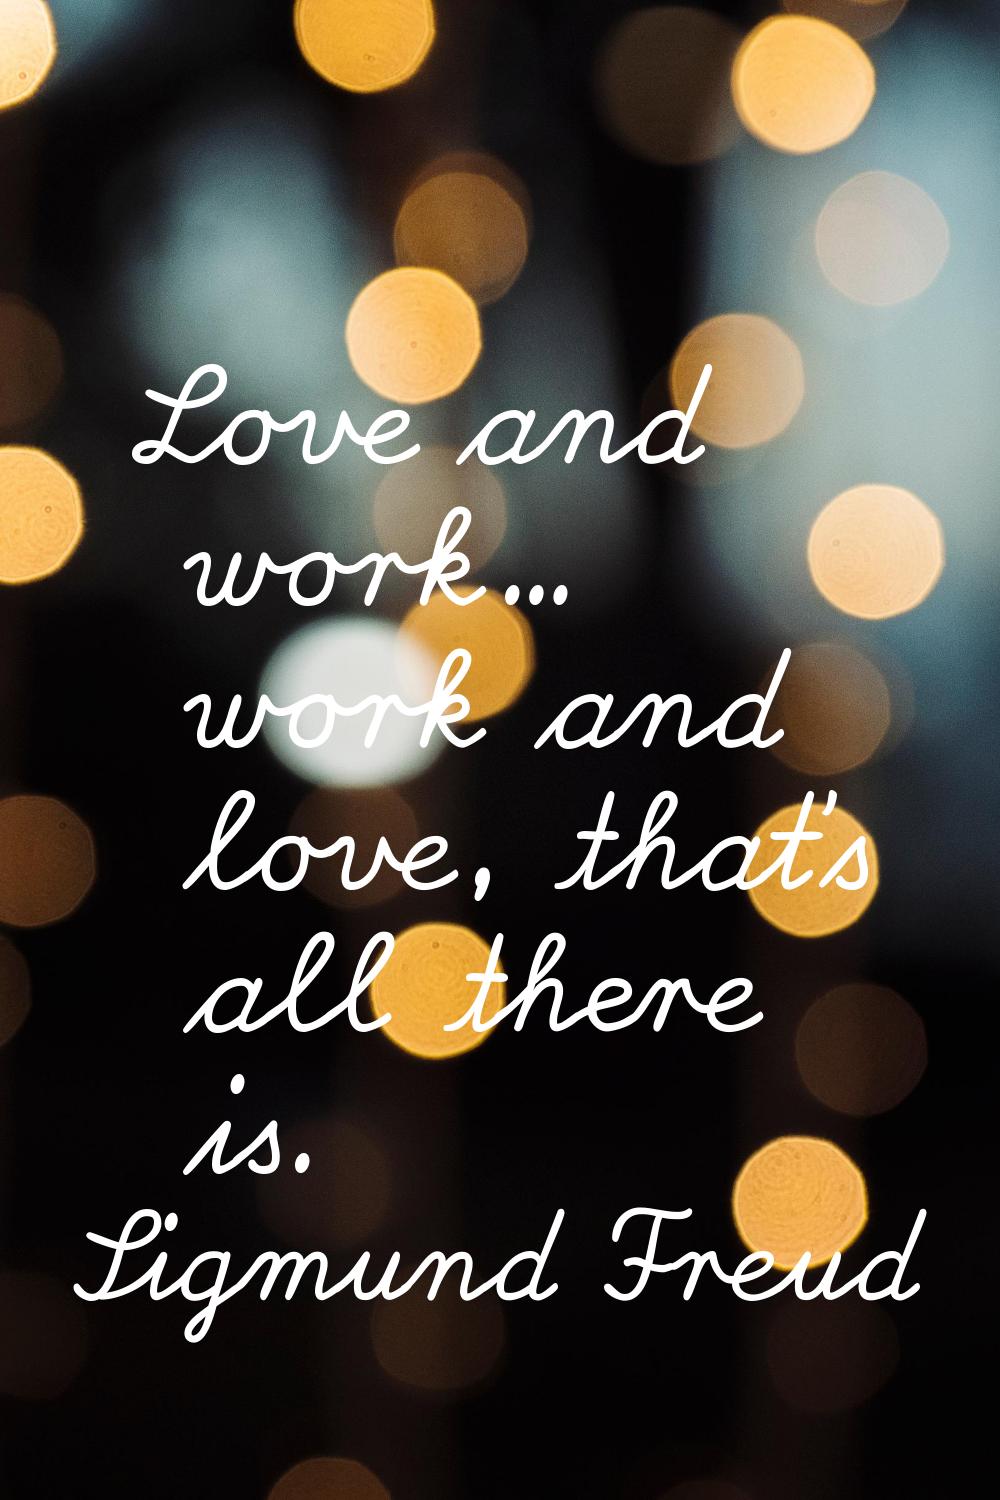 Love and work... work and love, that's all there is.